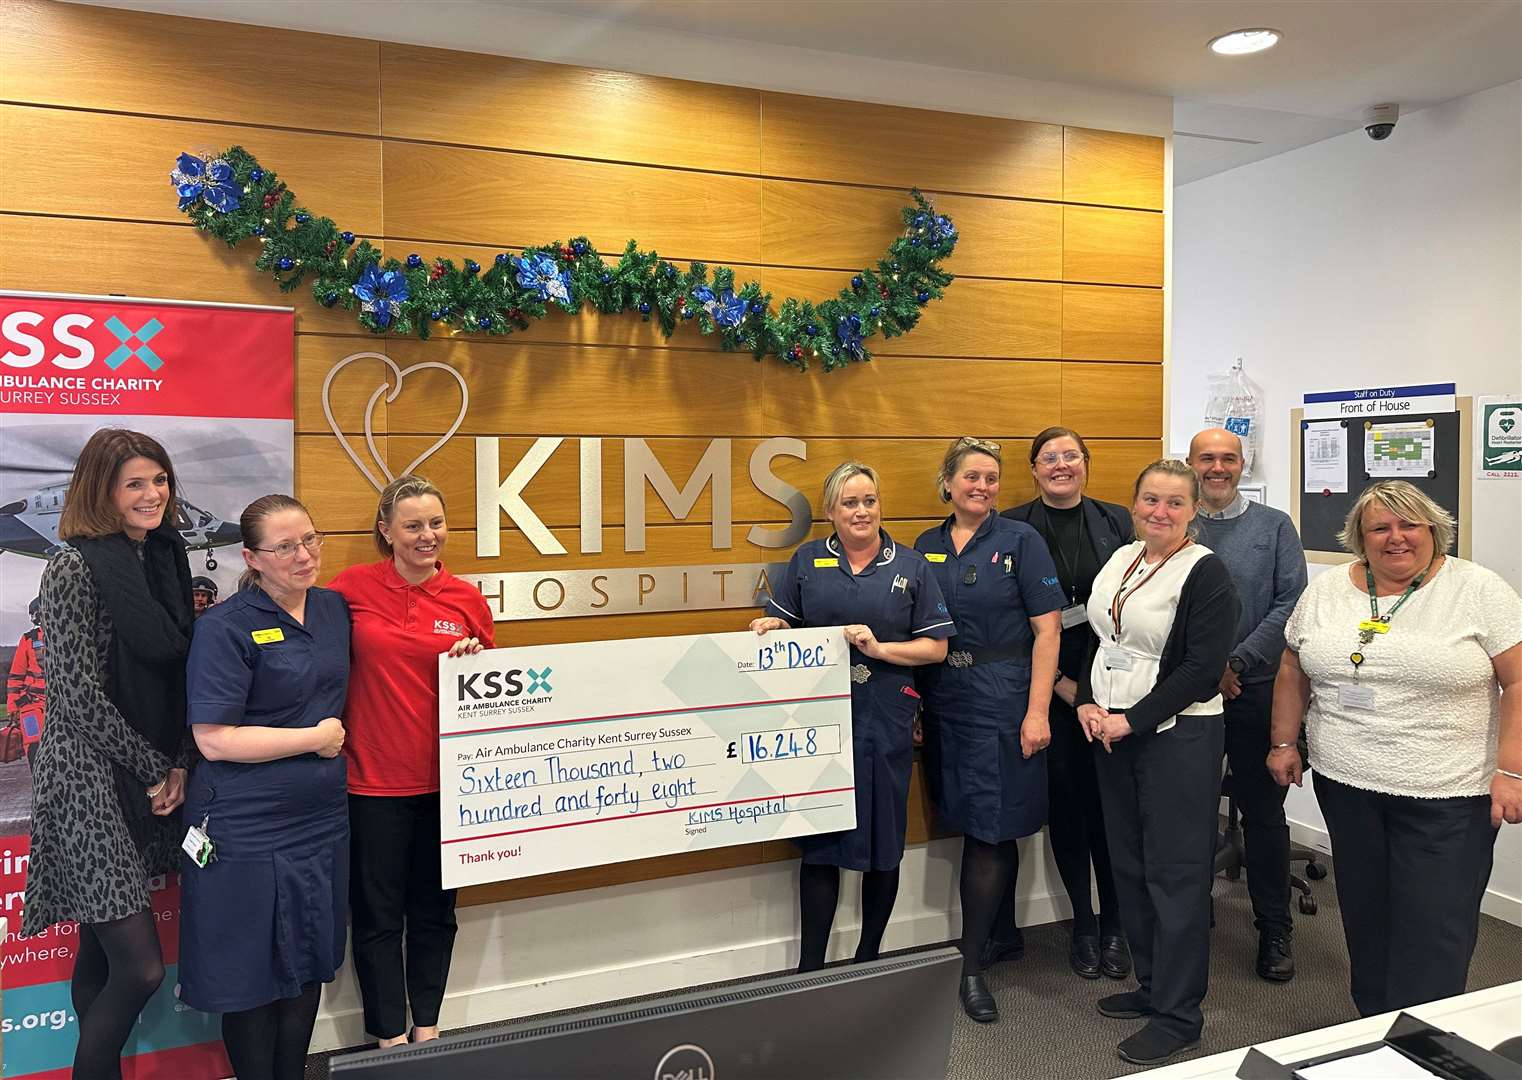 Kent, Surrey and Sussex Air Ambulance Service were presented with a cheque for £16,248. Picture: KIMS Hospital